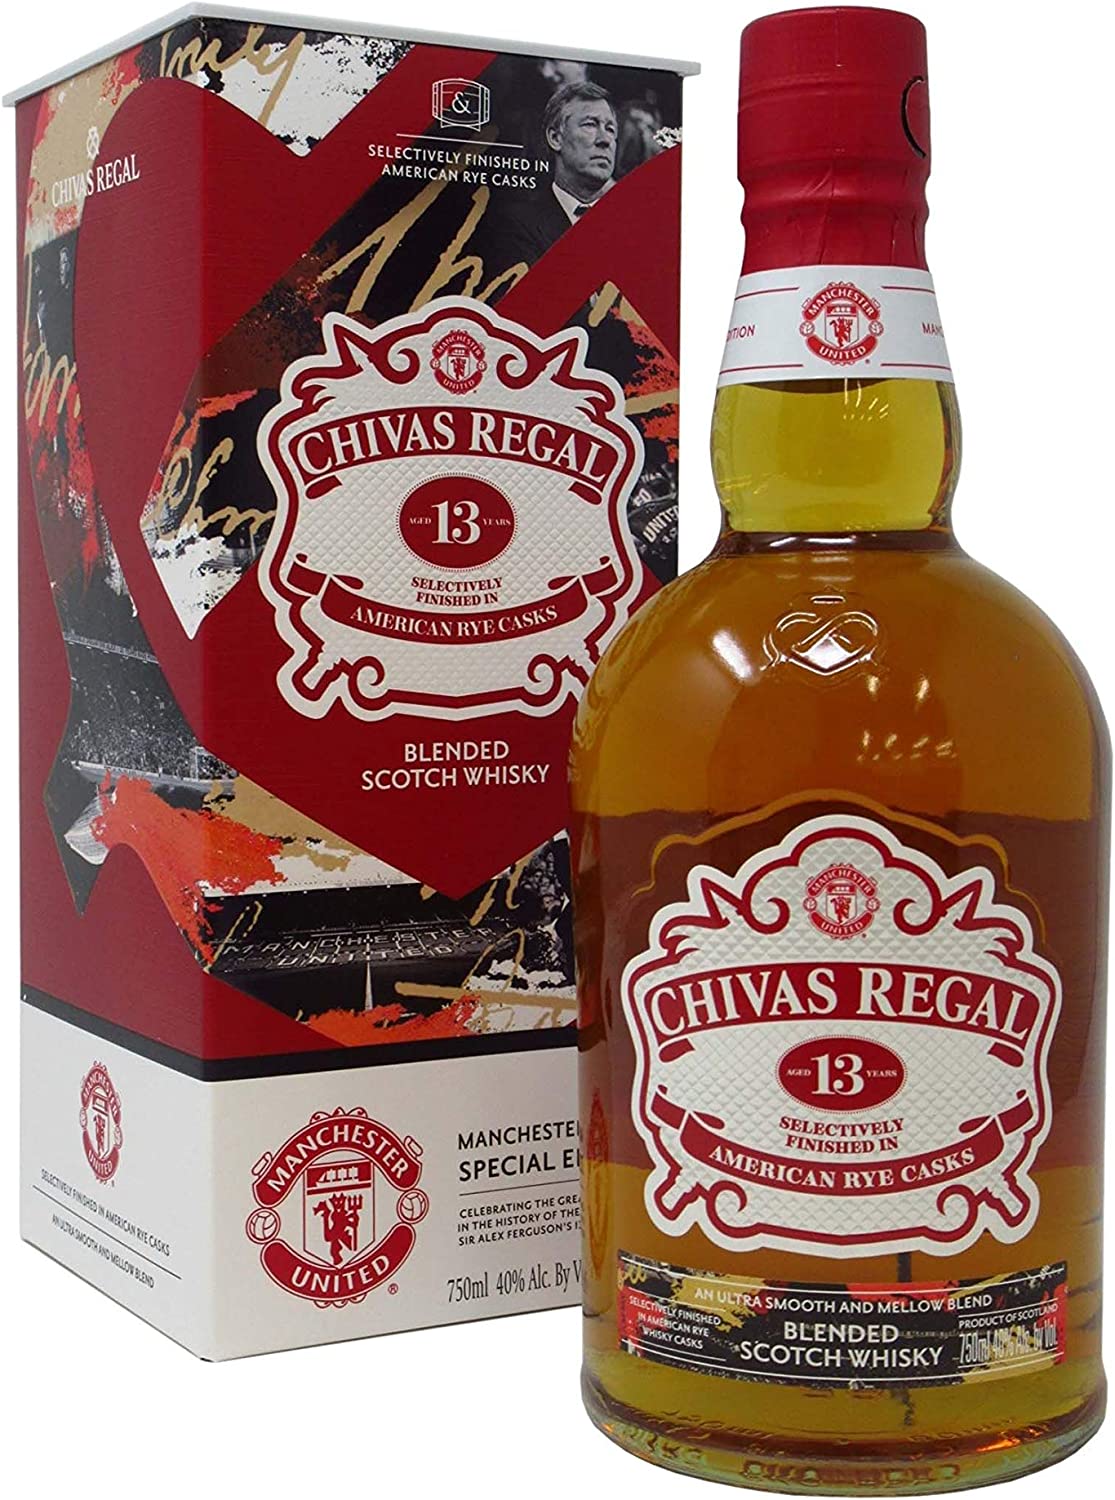 Chivas Regal 12 Year Old Blended Scotch Whisky MUFC Limited Edition 700ml